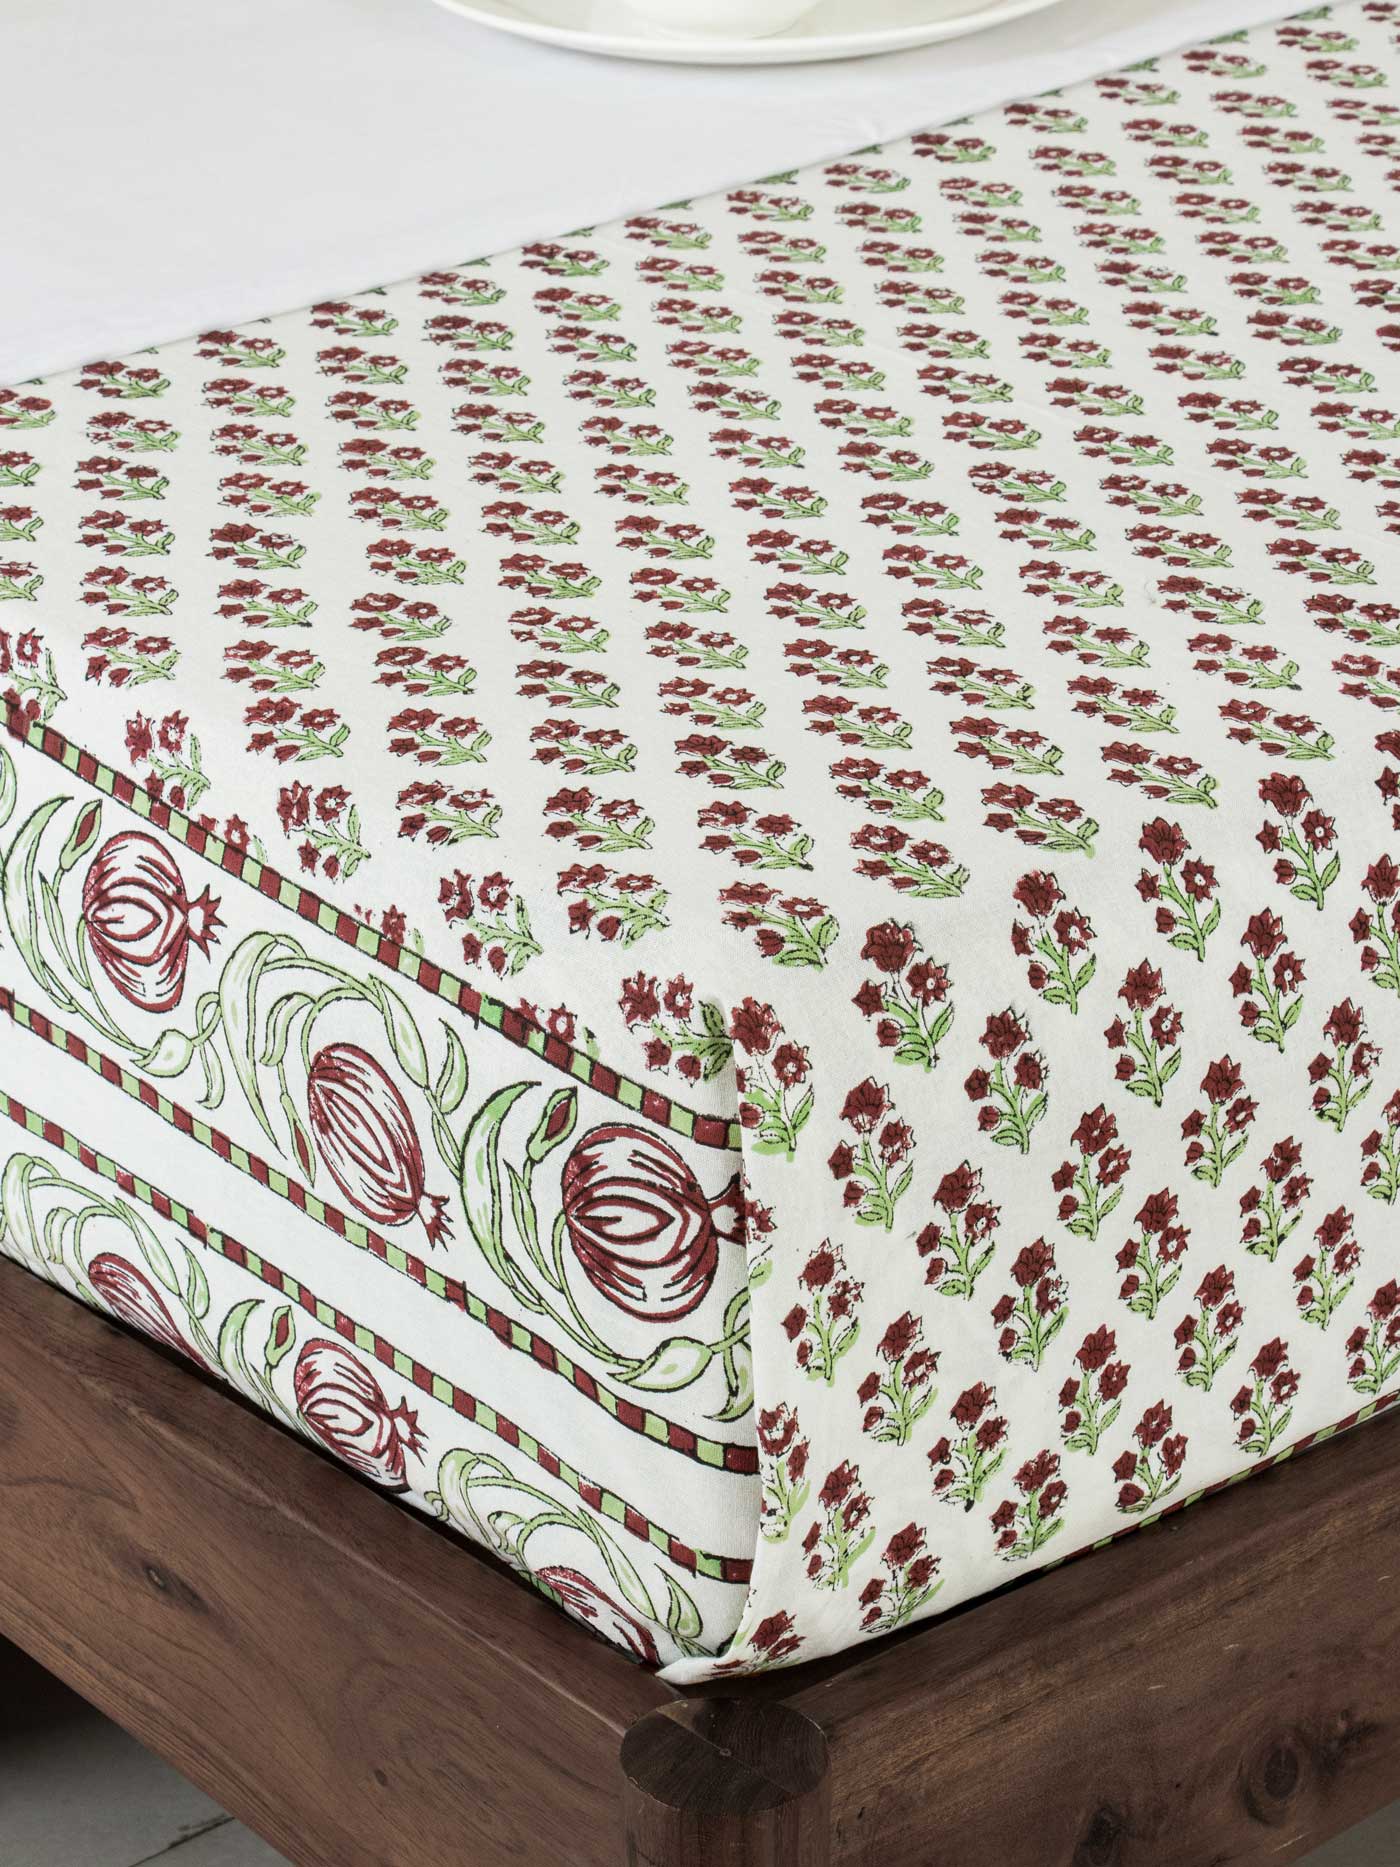 Red Mugal Booti design hand block Double Bedsheet with Annar border